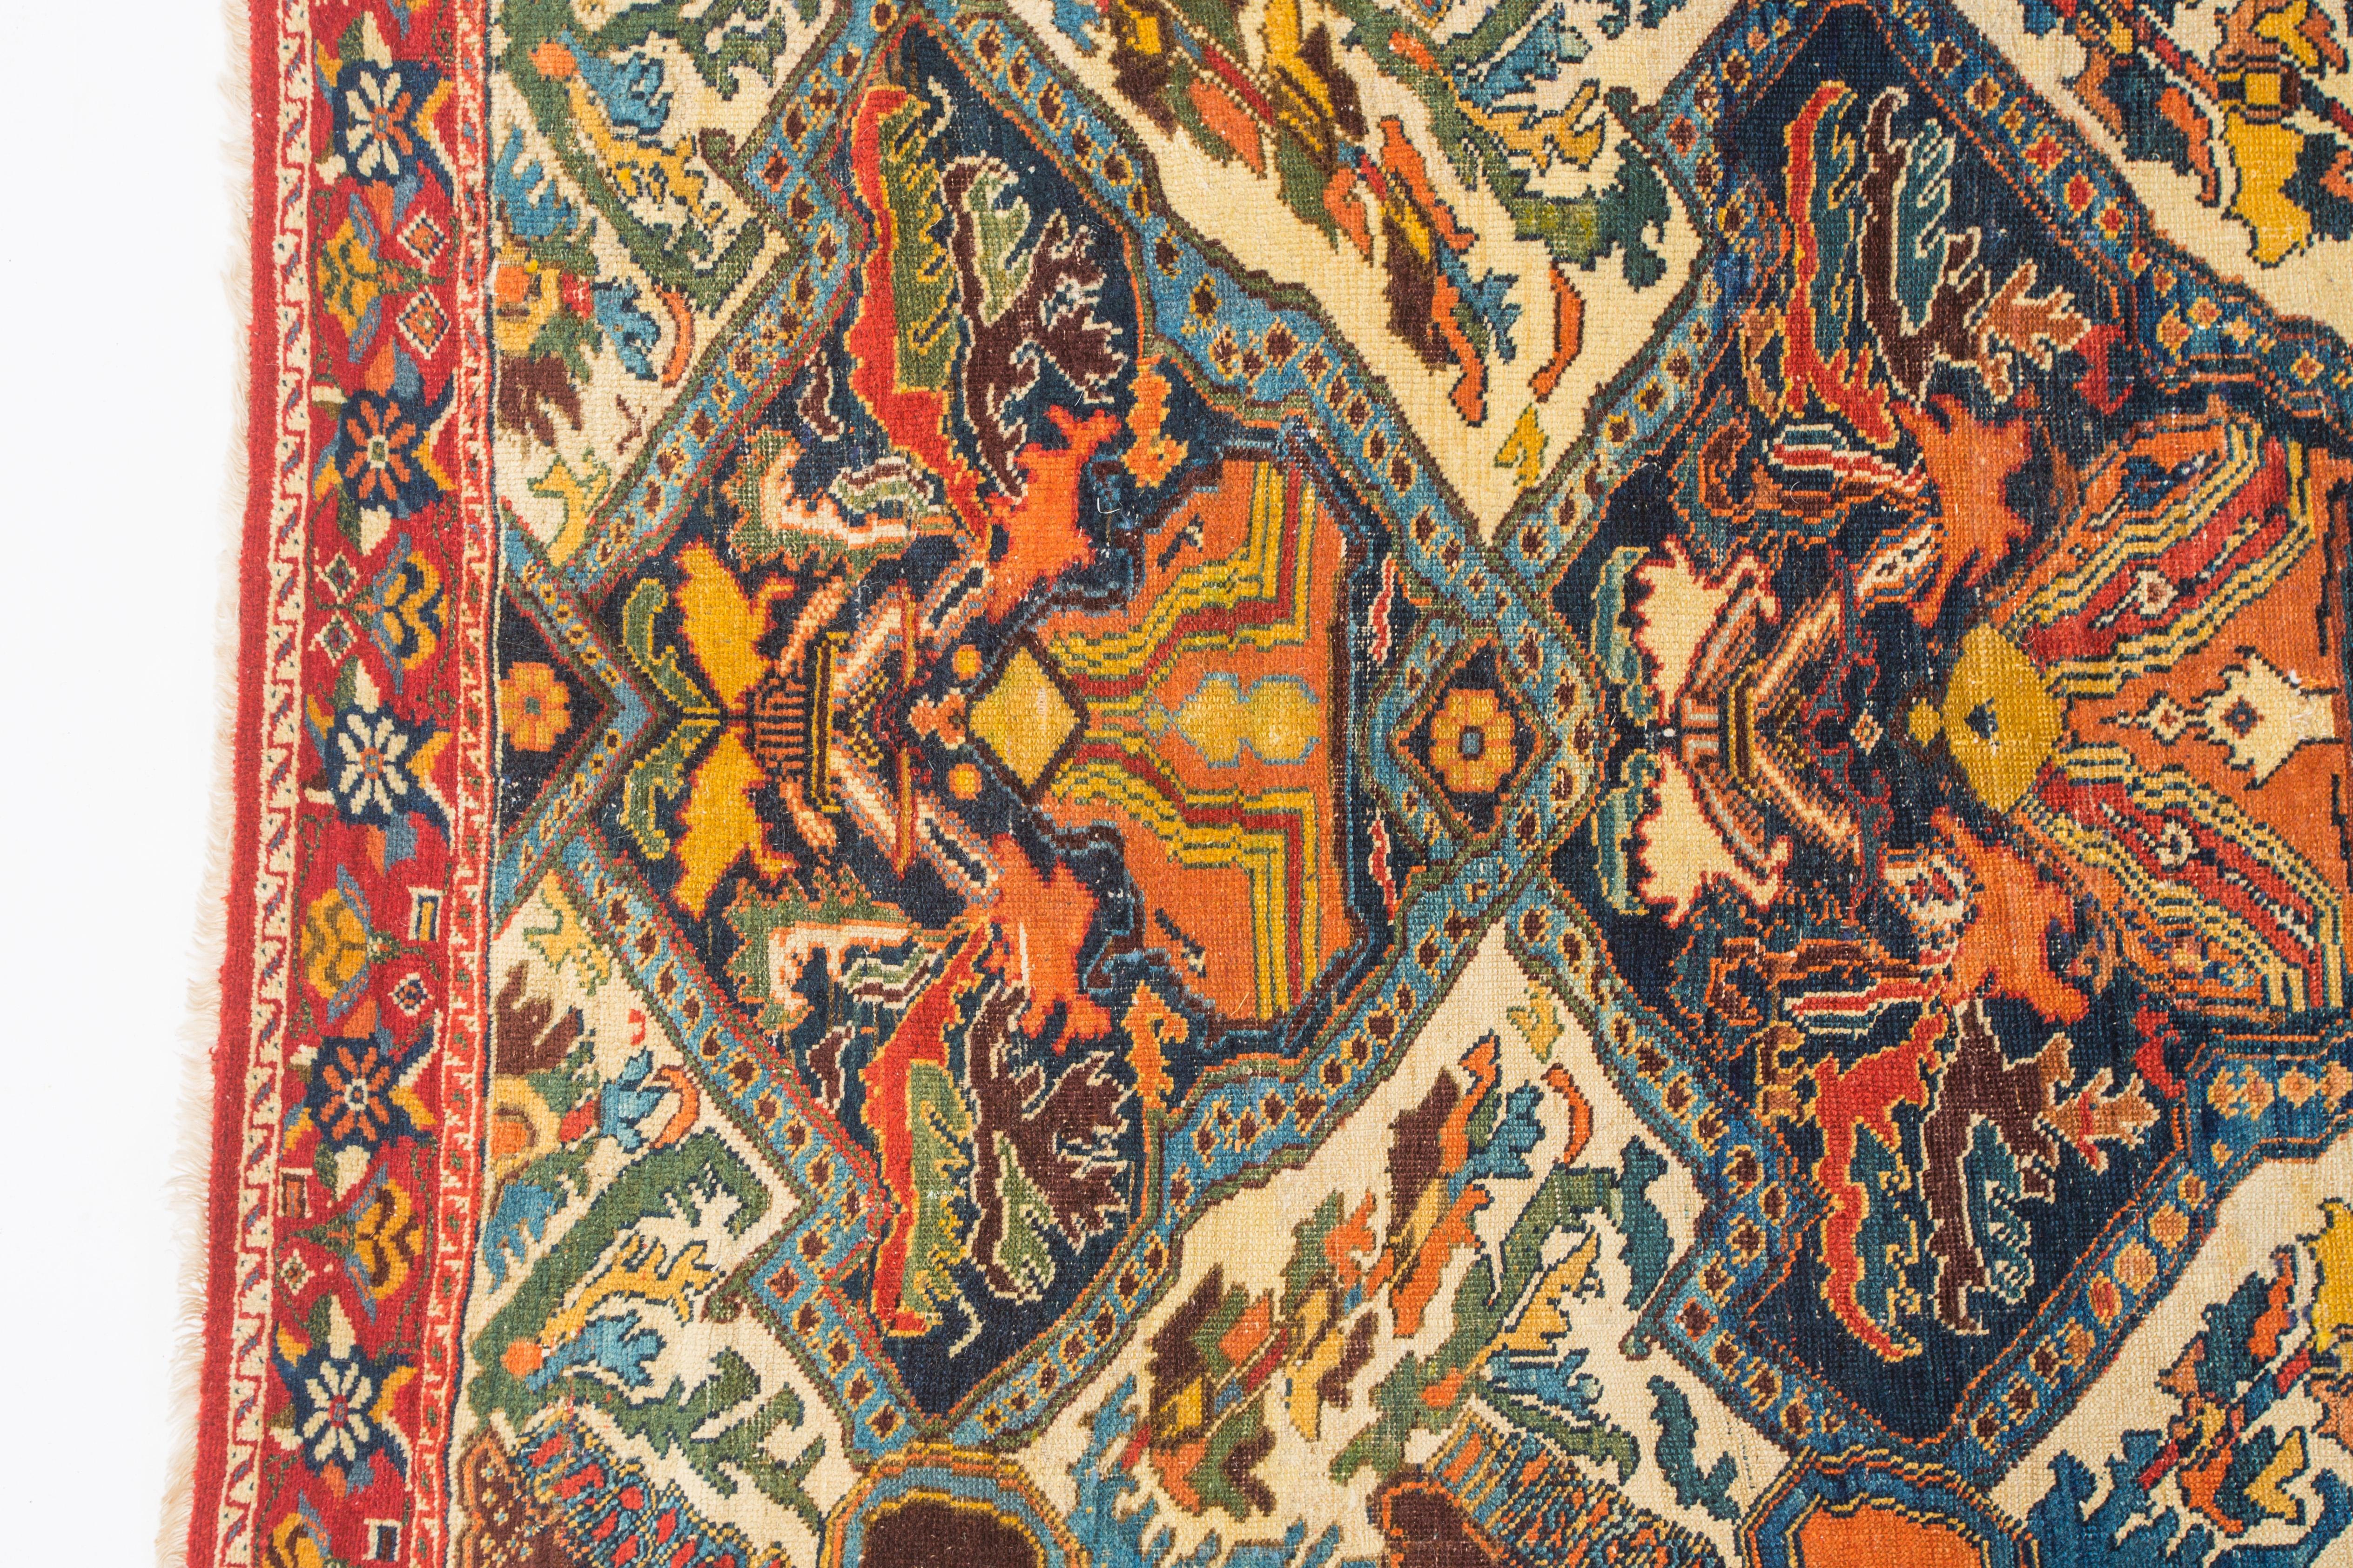 Persian Astonishing 19th Century Rare Afshar Tribal rug  featured in famous book  For Sale